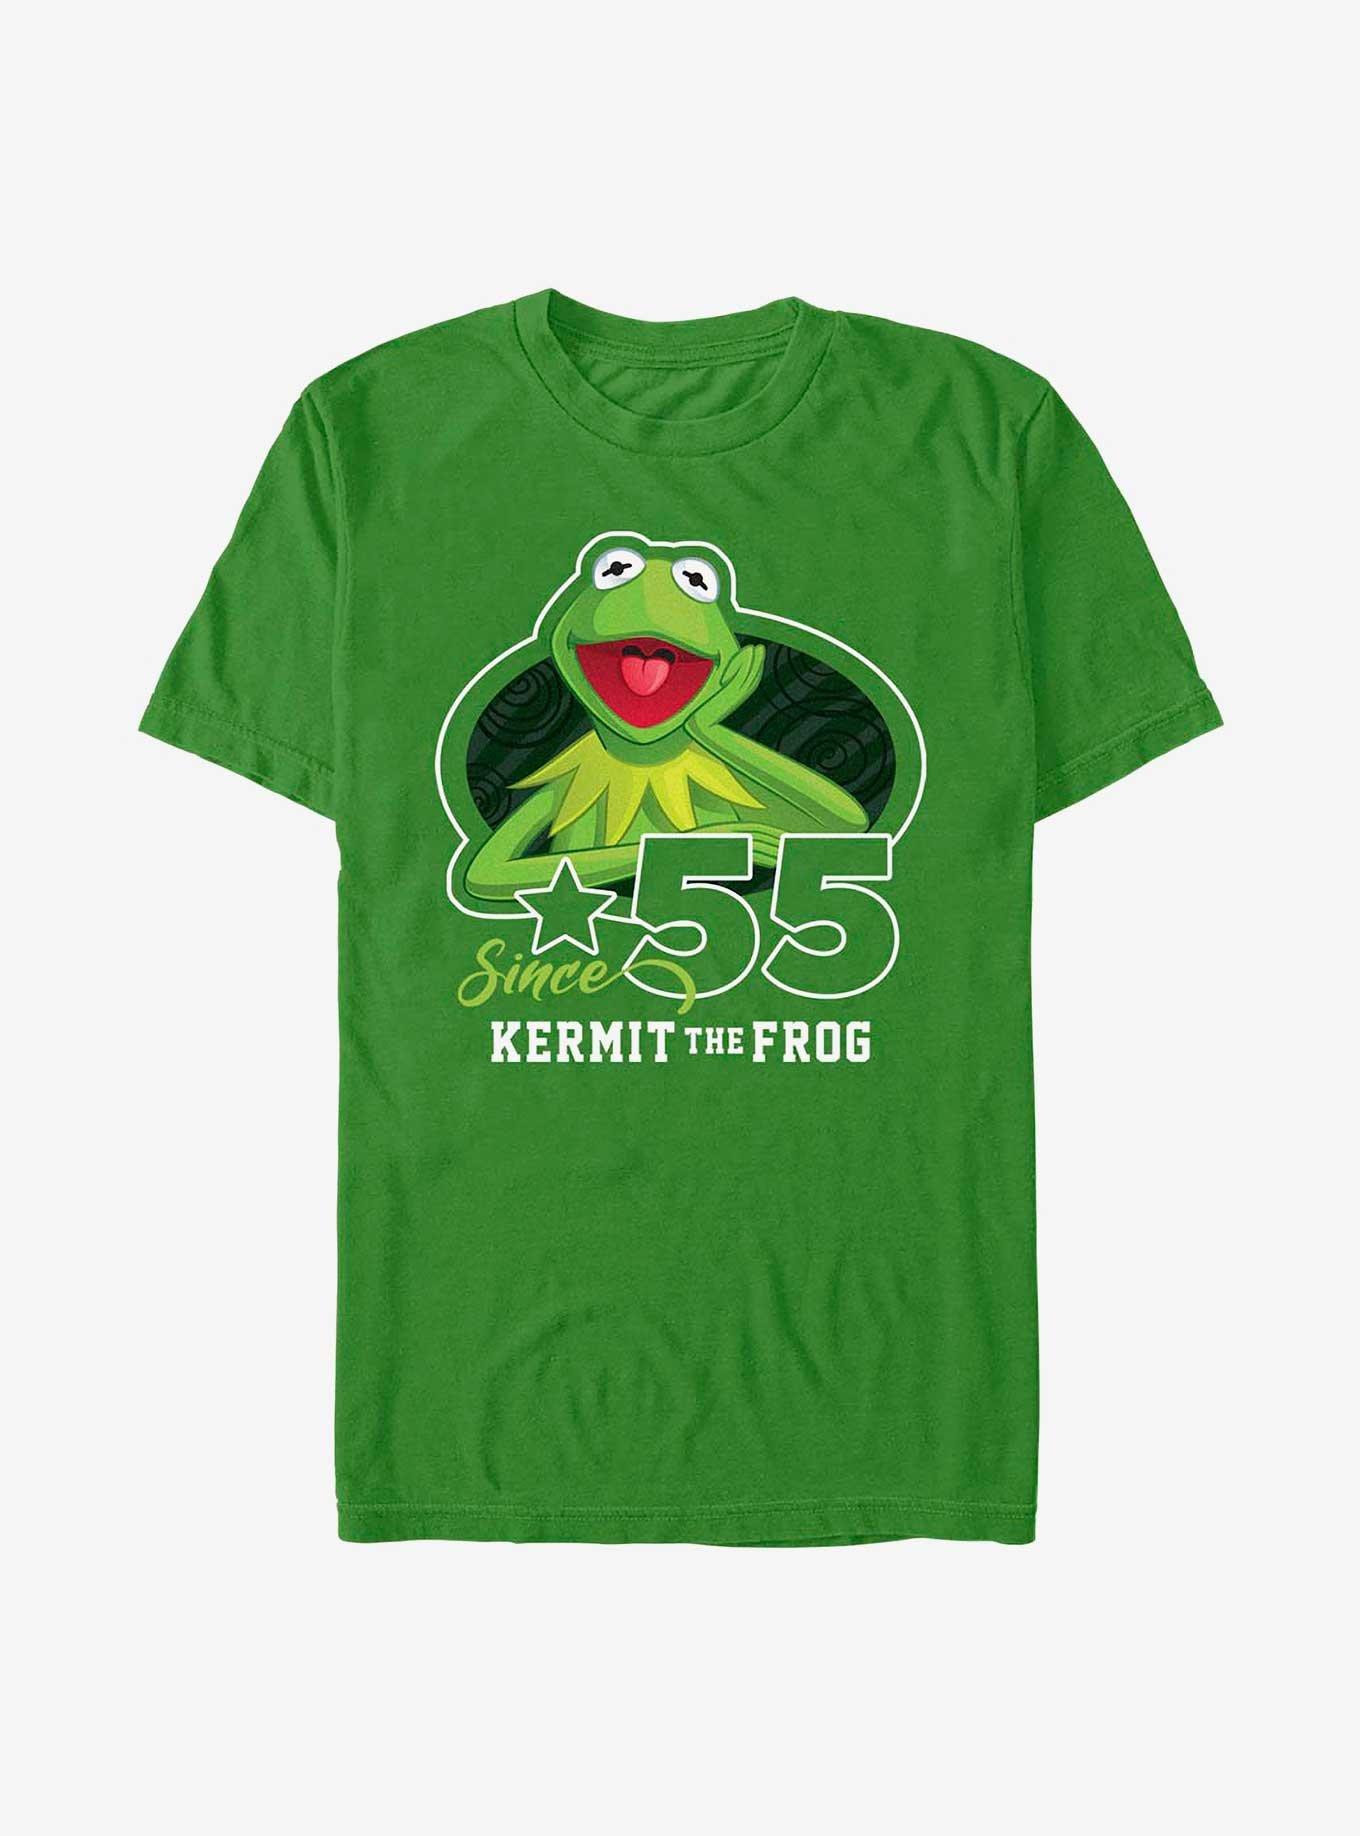 Disney The Muppets Kermit The Frog Since '55 T-Shirt, KELLY, hi-res